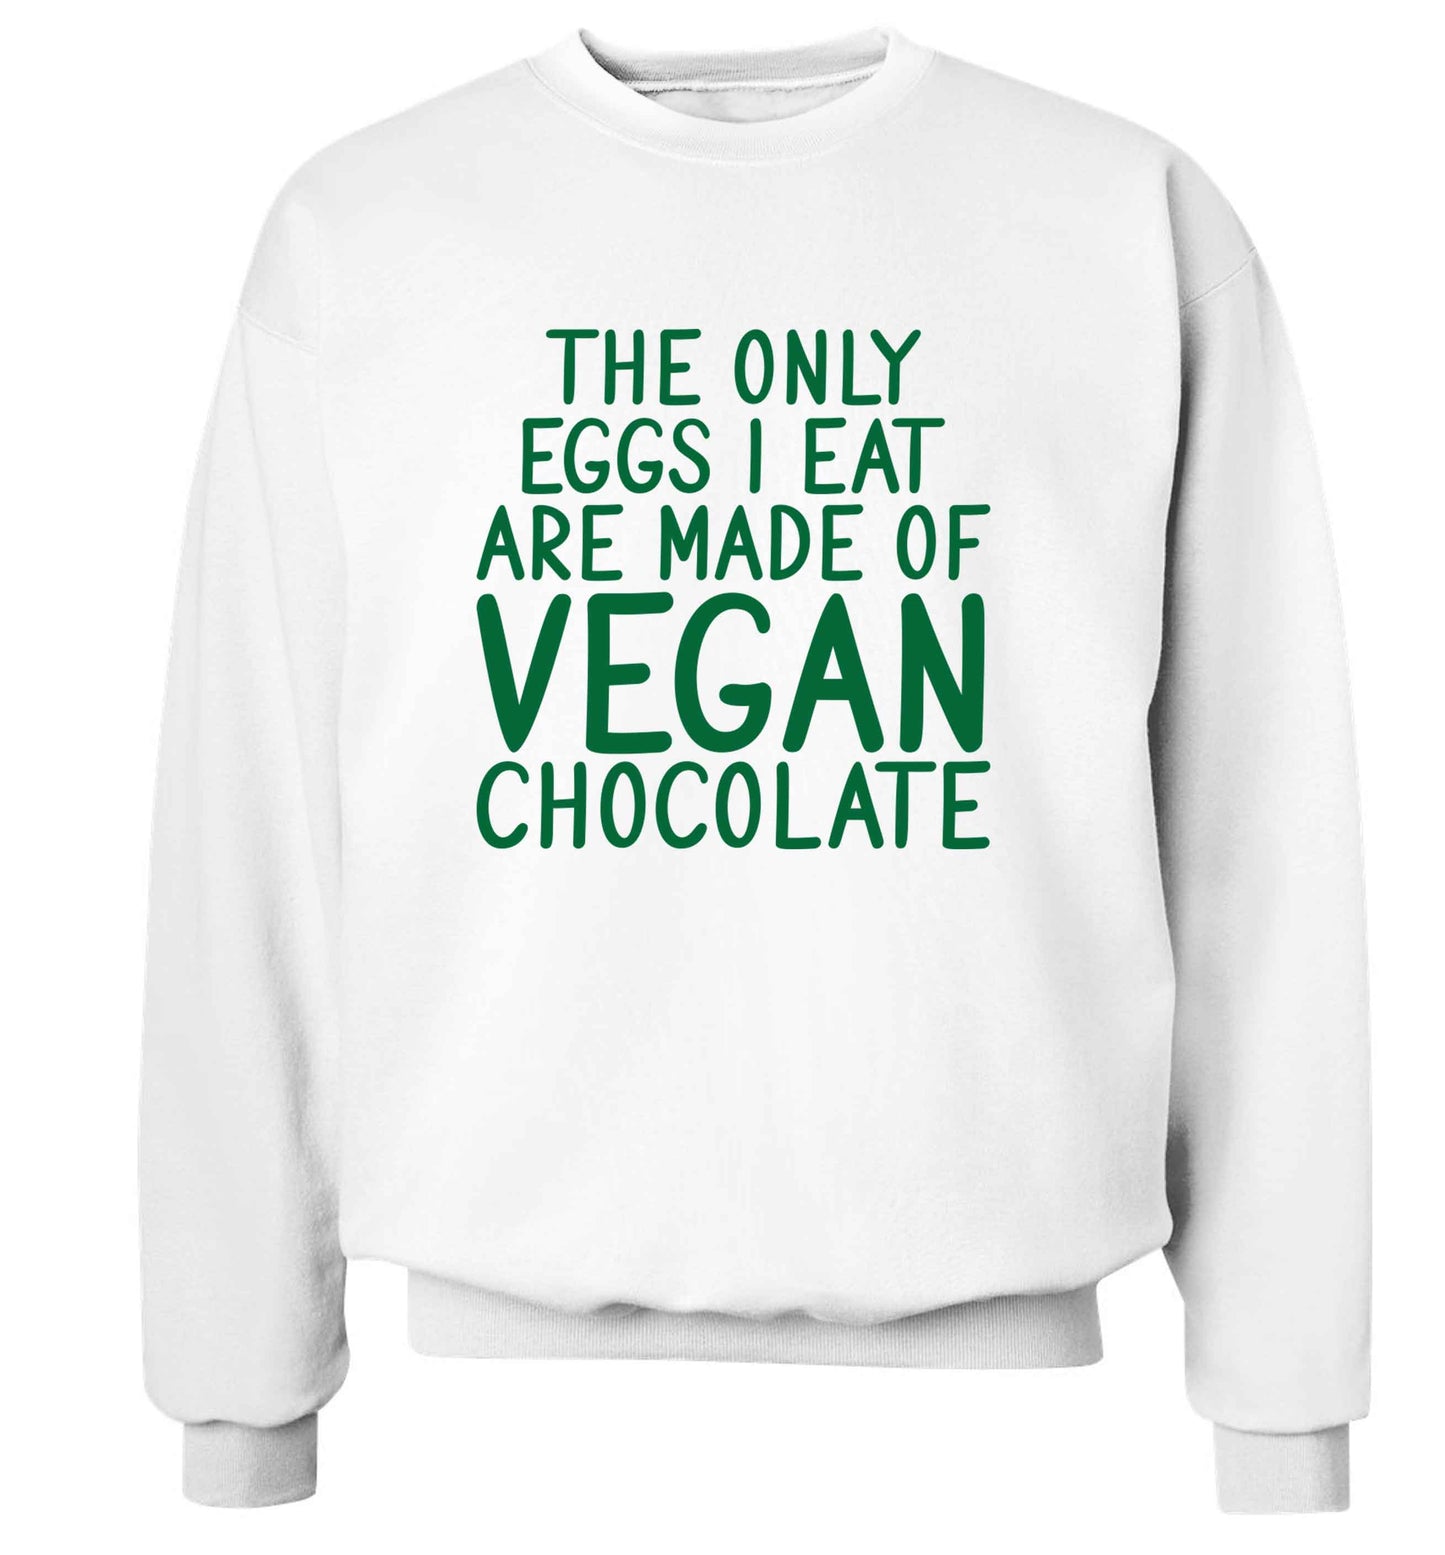 The only eggs I eat are made of vegan chocolate adult's unisex white sweater 2XL